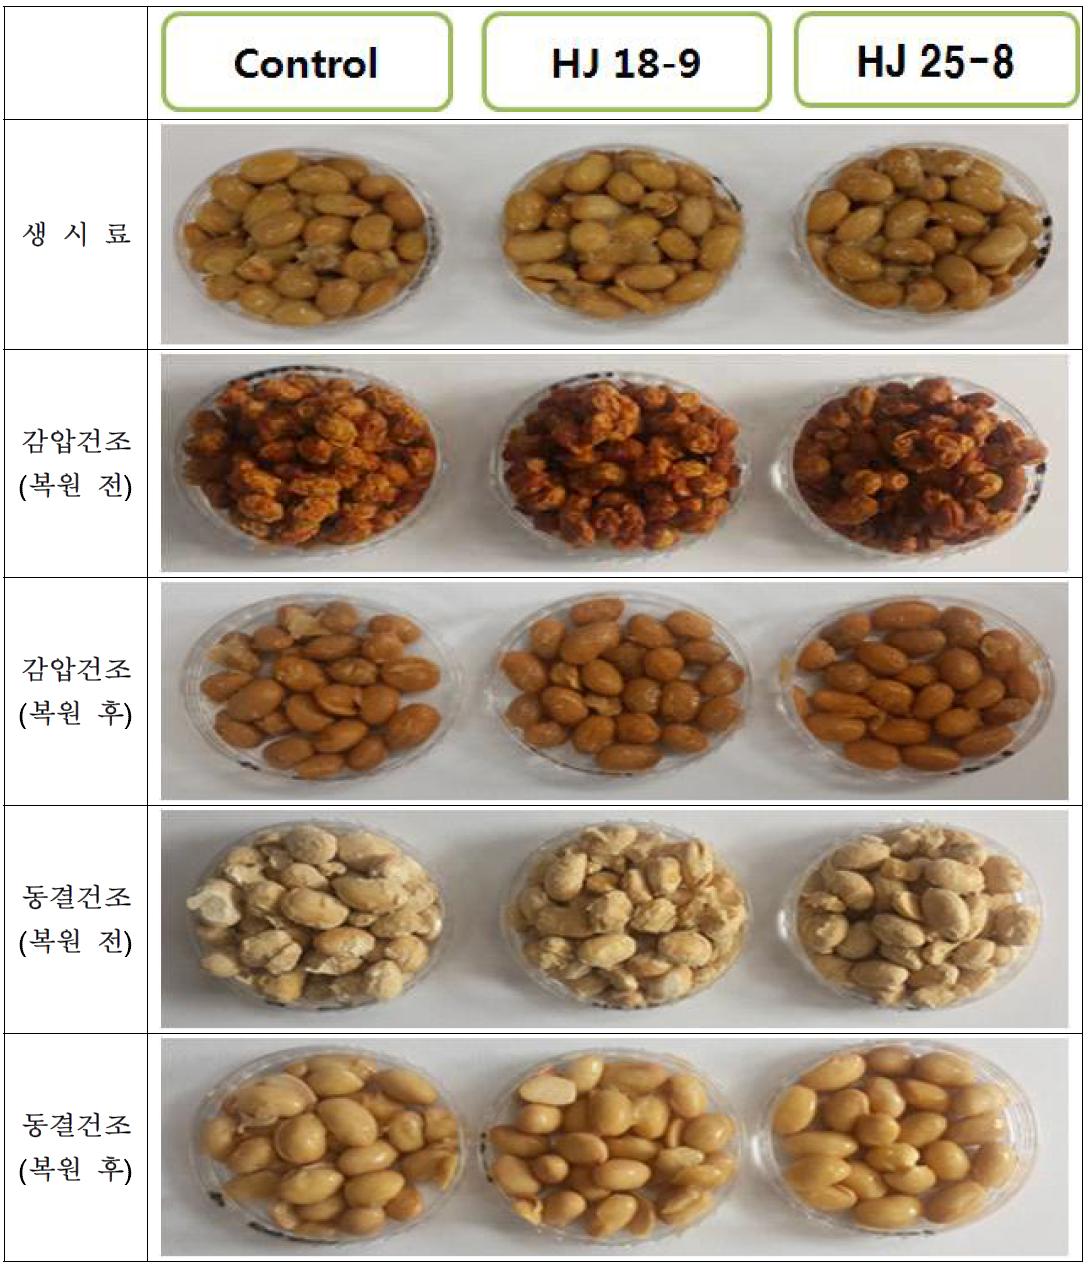 Changes in image during dry type of Doenjang fermentation by the three strains B. subtilis